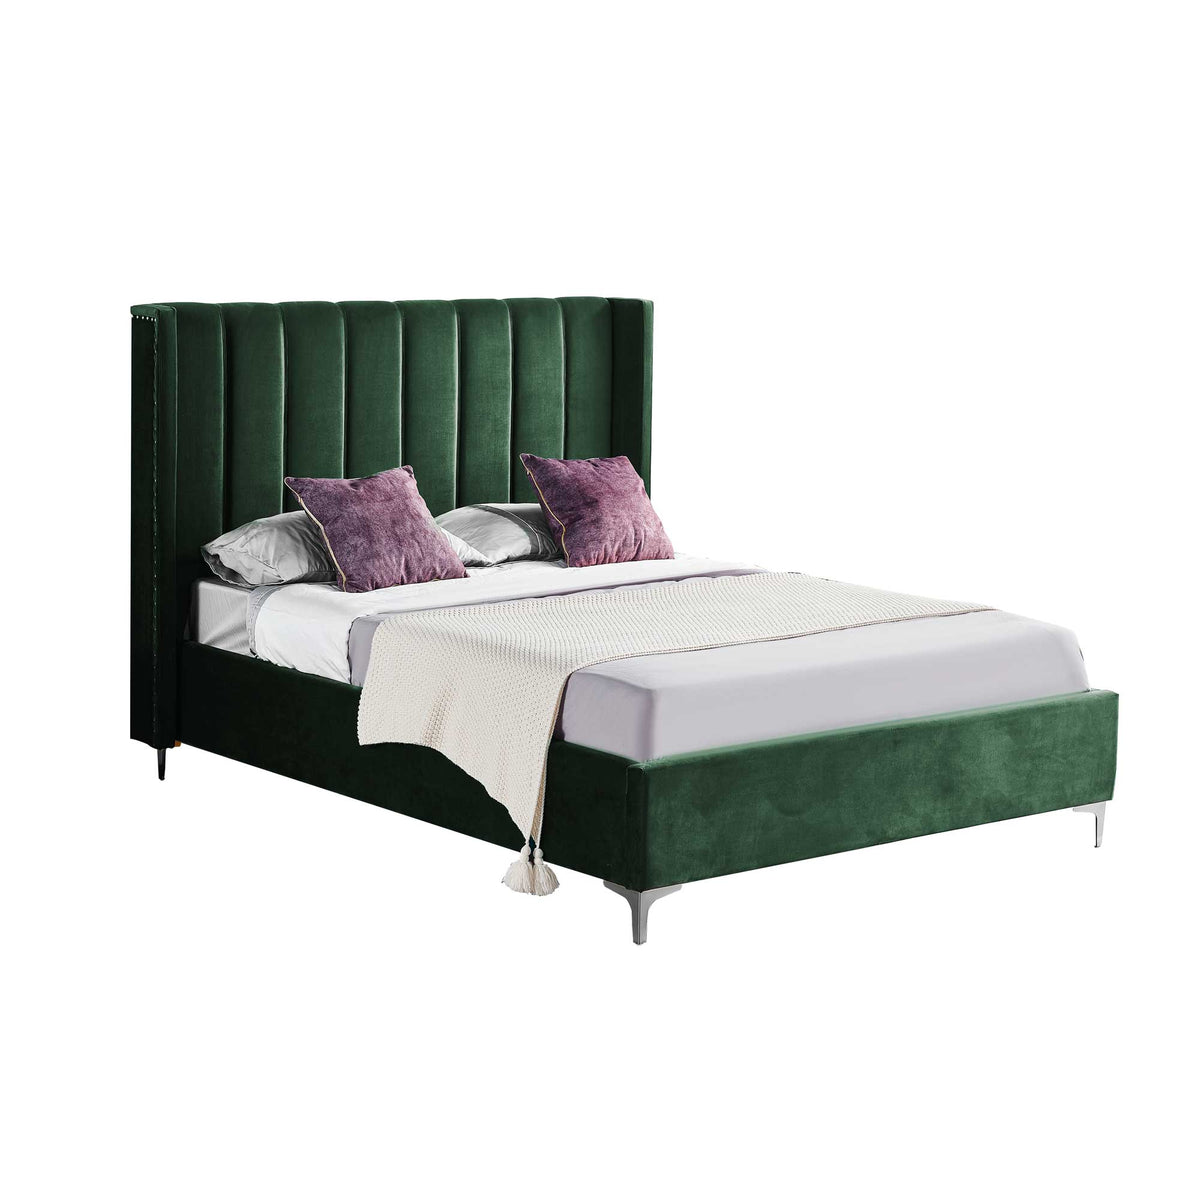 Colorado Dark Green Bed Frame - 2 Sizes Available